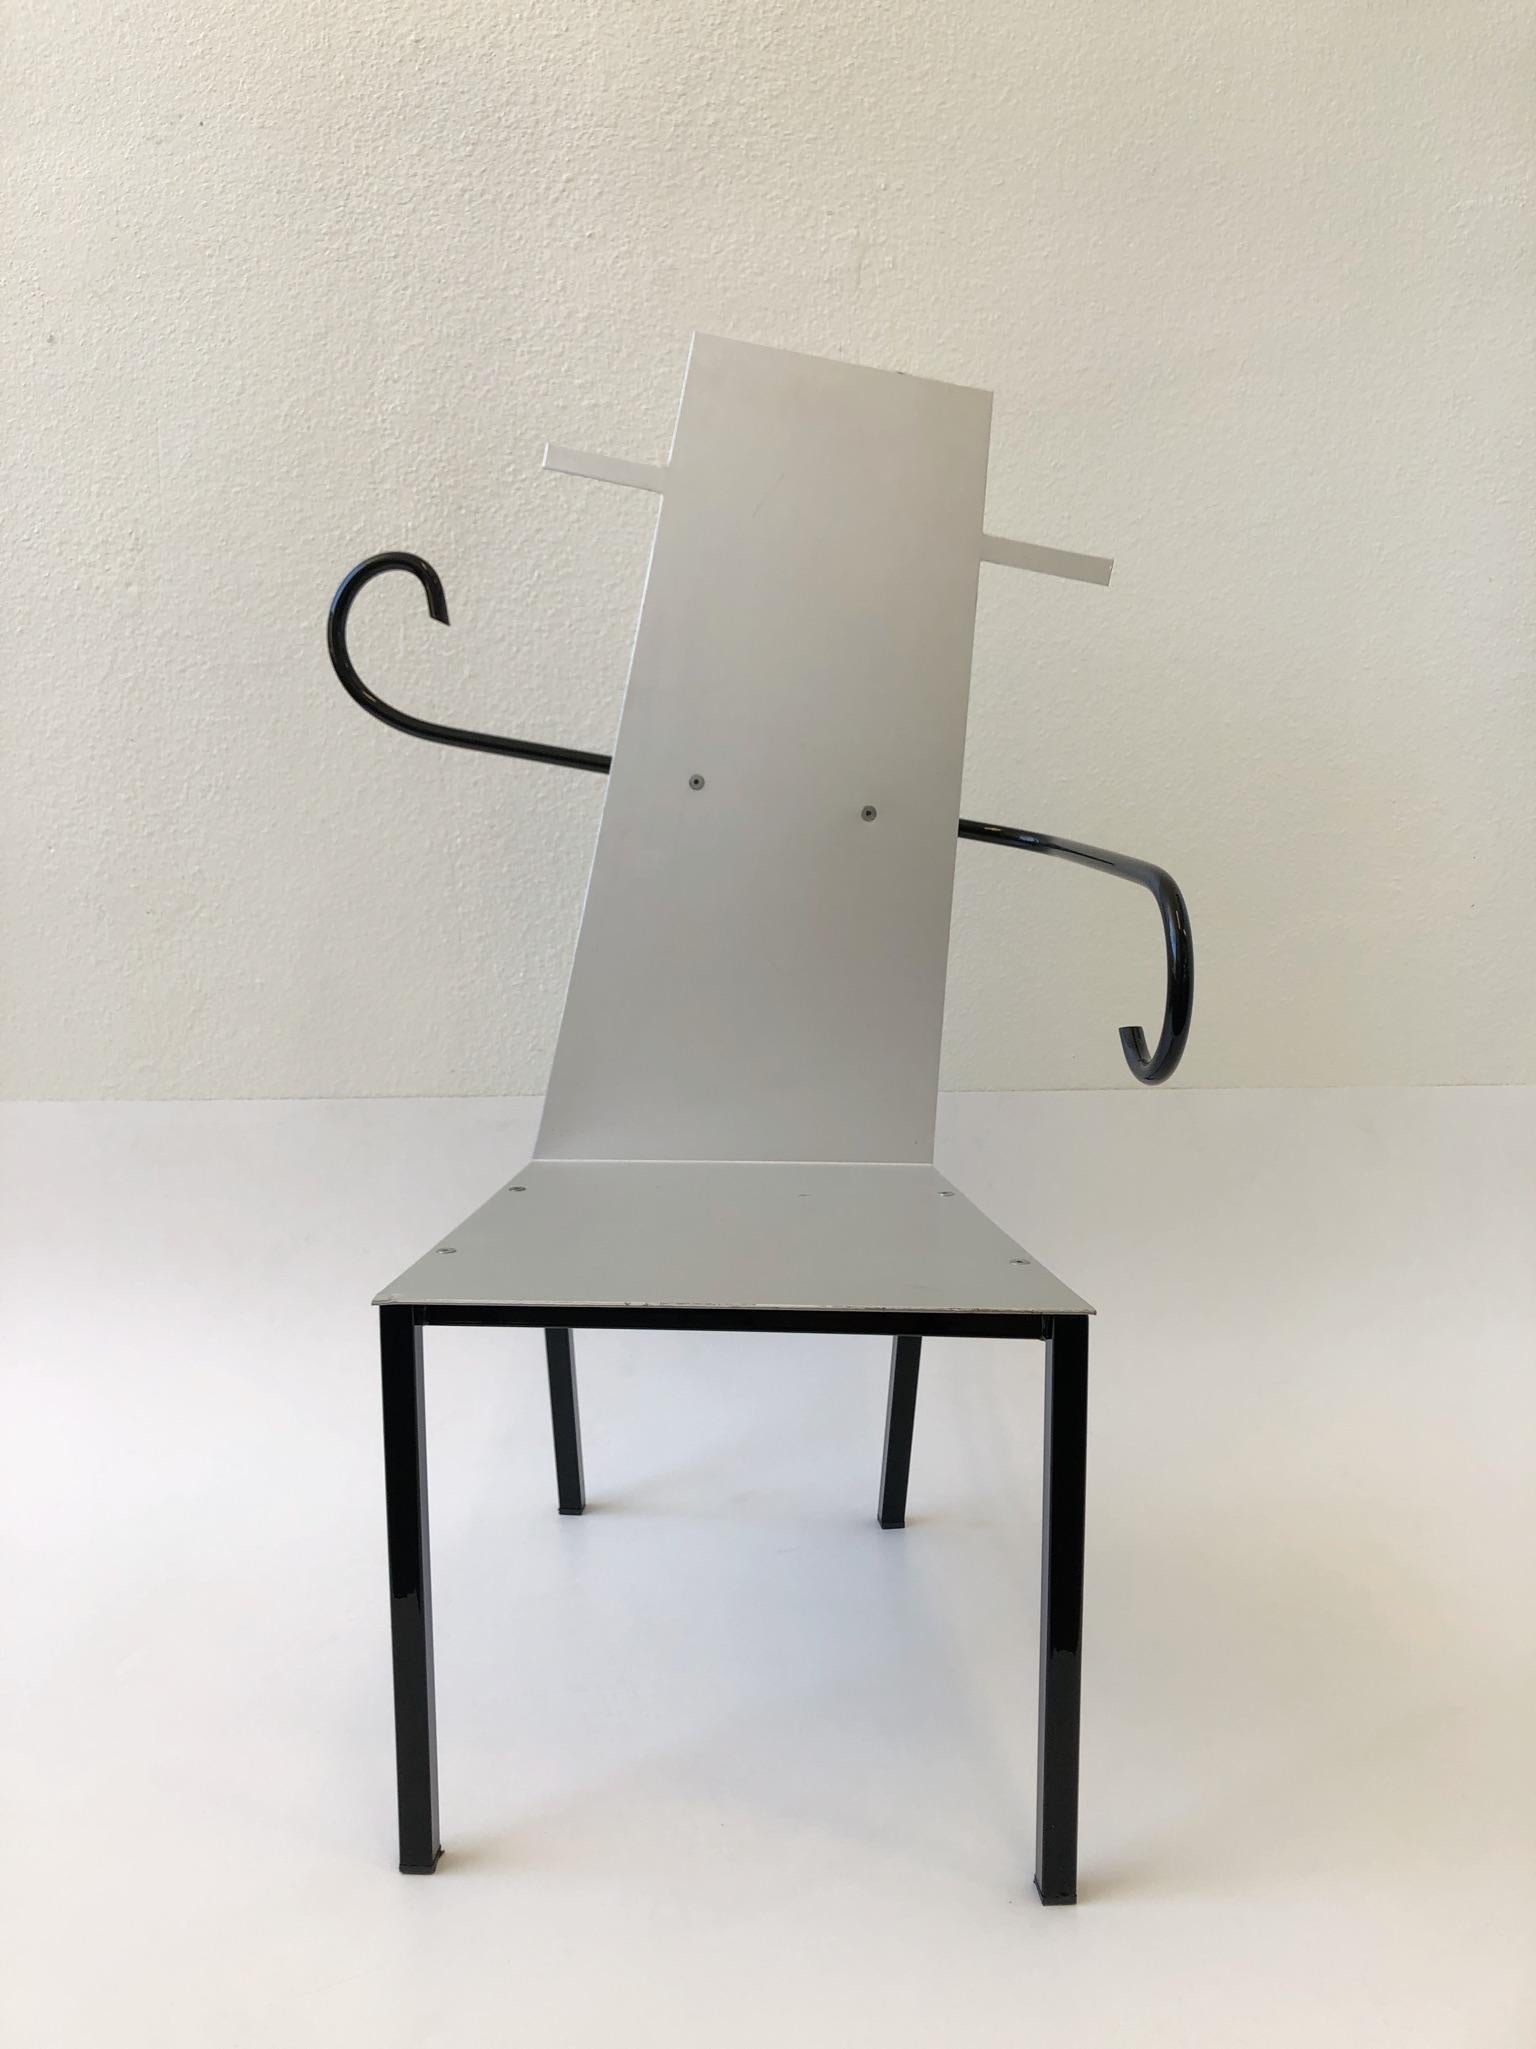 A spectacular Italian Postmodern sculptural armchair from the 1980s.
The black part of the chair is powder coated steel and the seat and back is satin aluminum. There is minor wear to the seat (see detail photos).